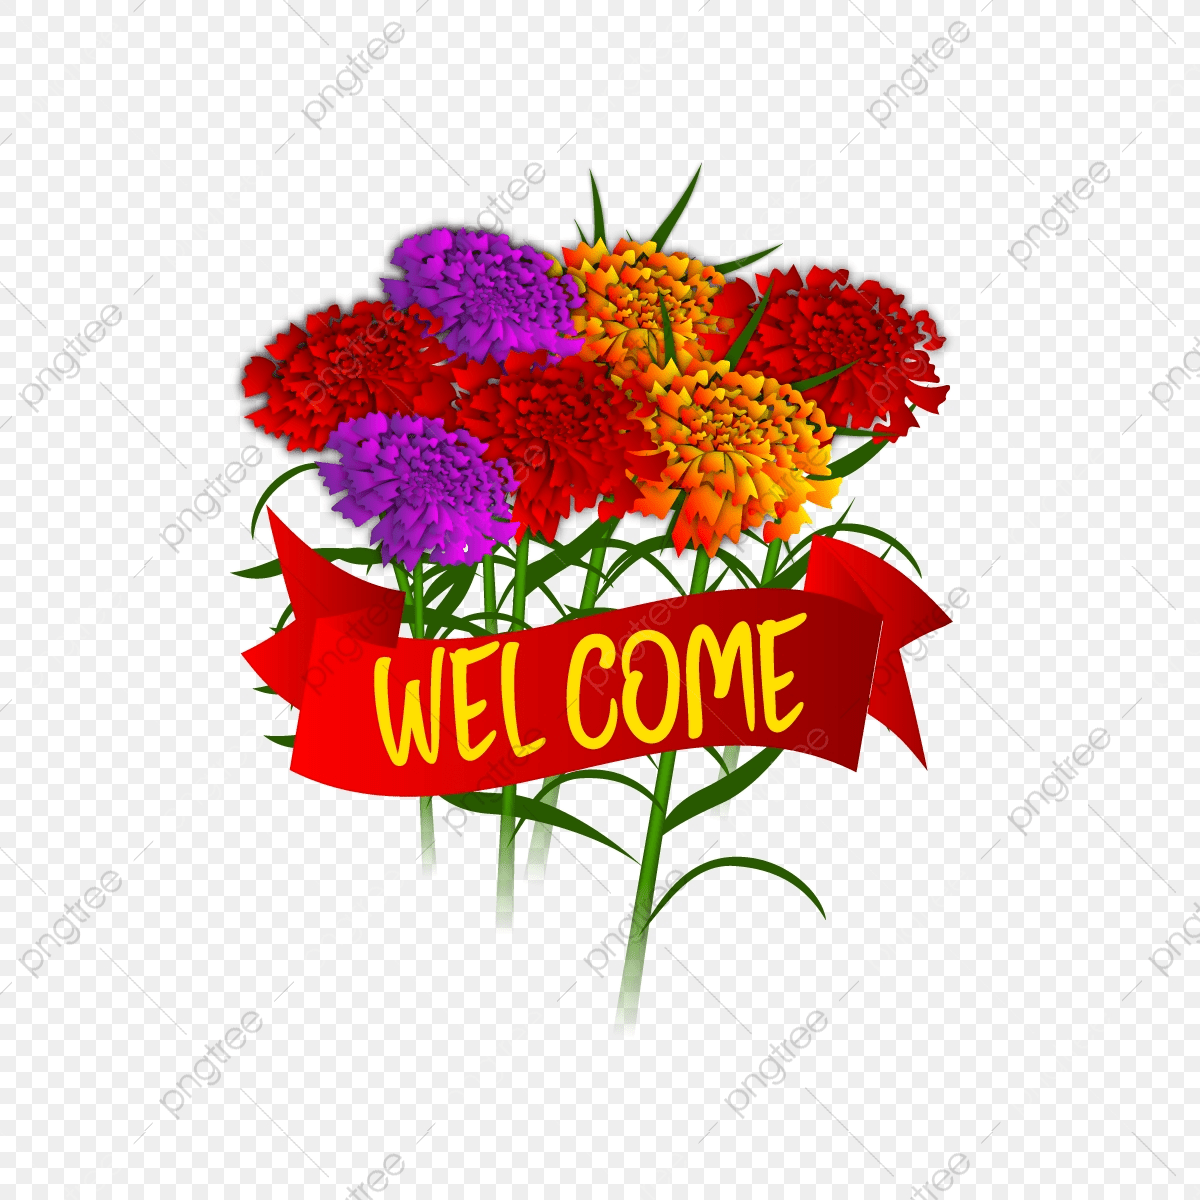 Welcome Image